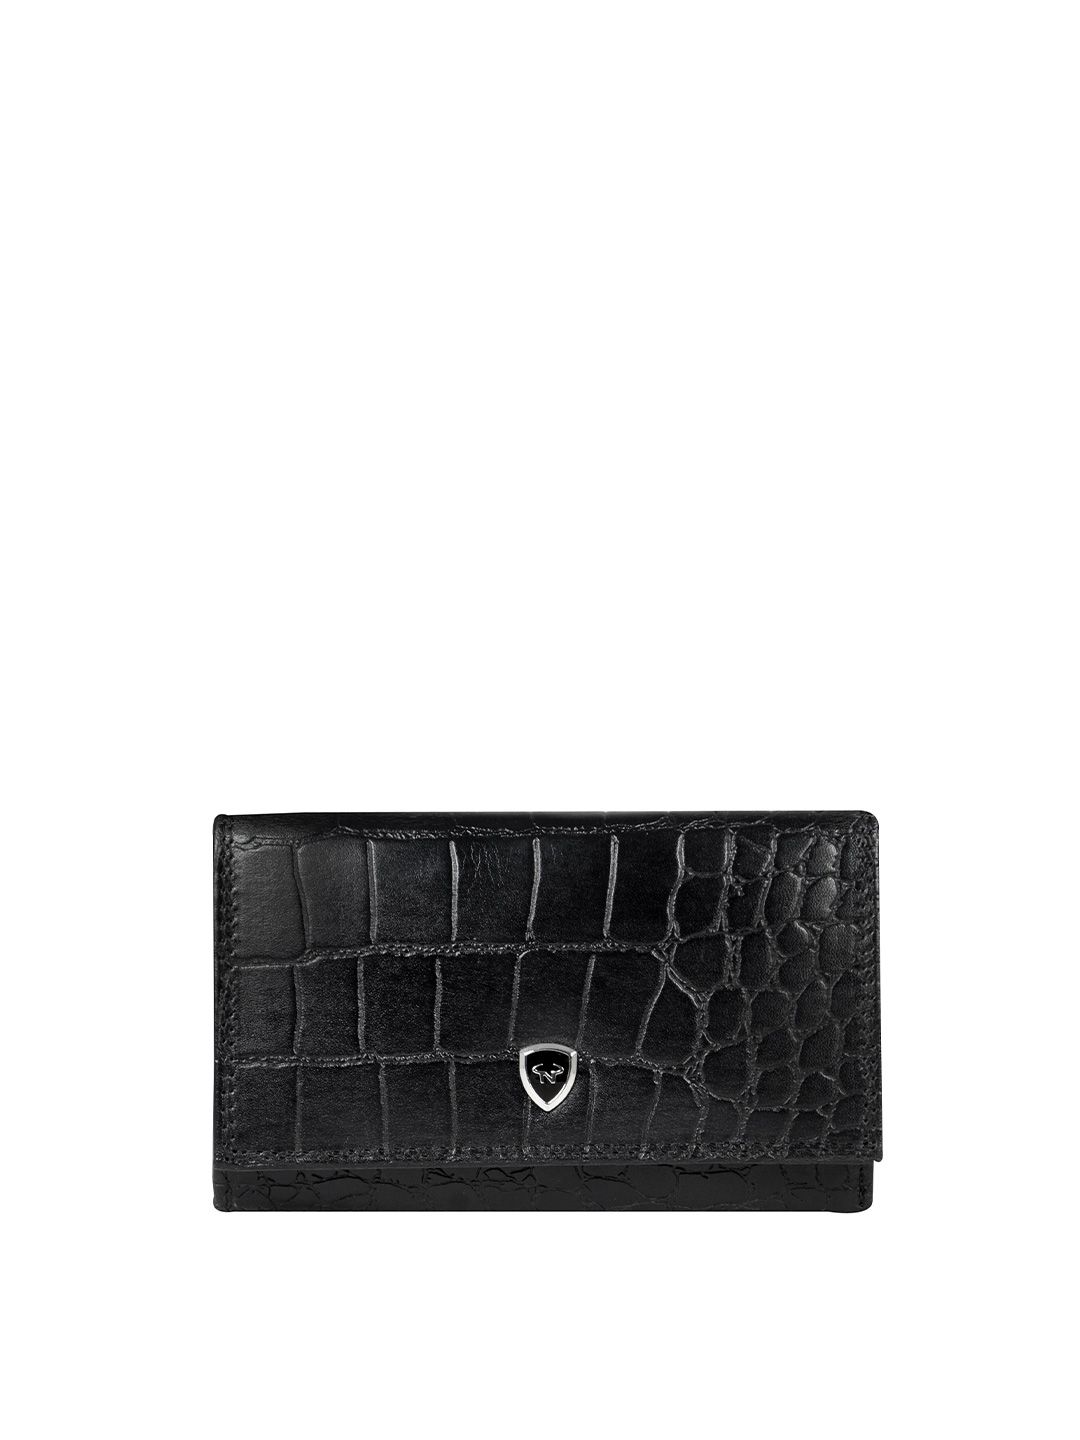 CALFNERO Women Black Textured Two Fold Wallet Price in India